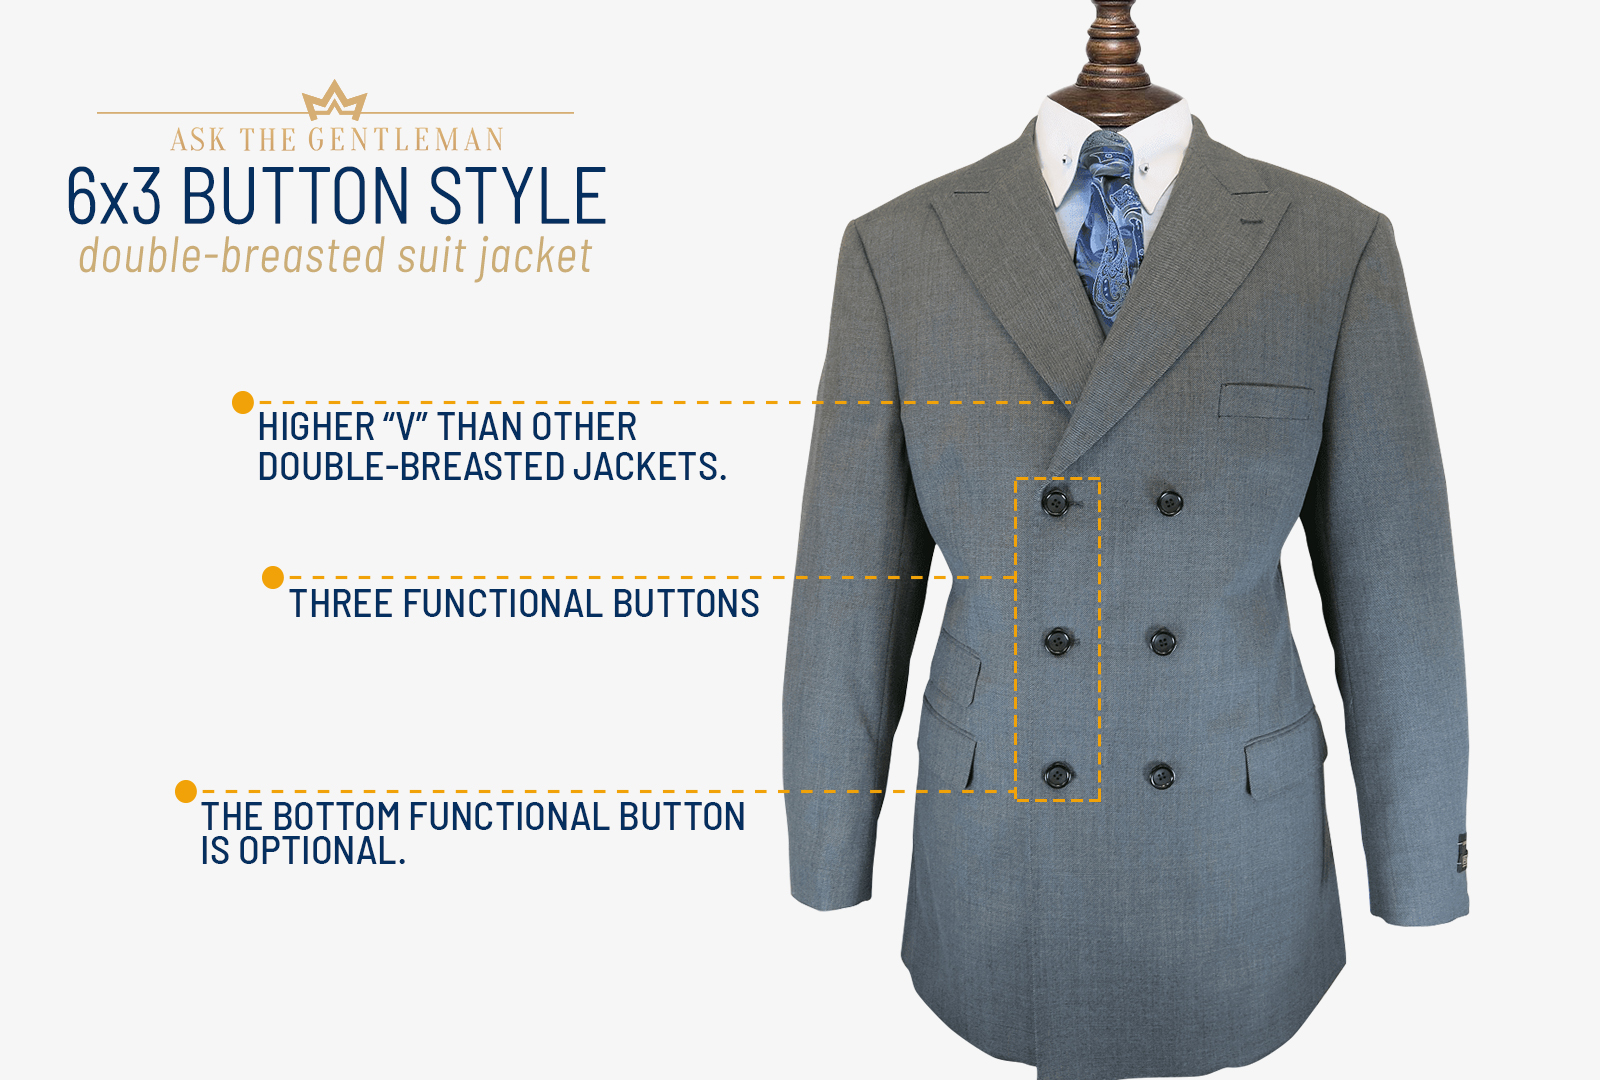 6x3 double-breasted suit jacket style